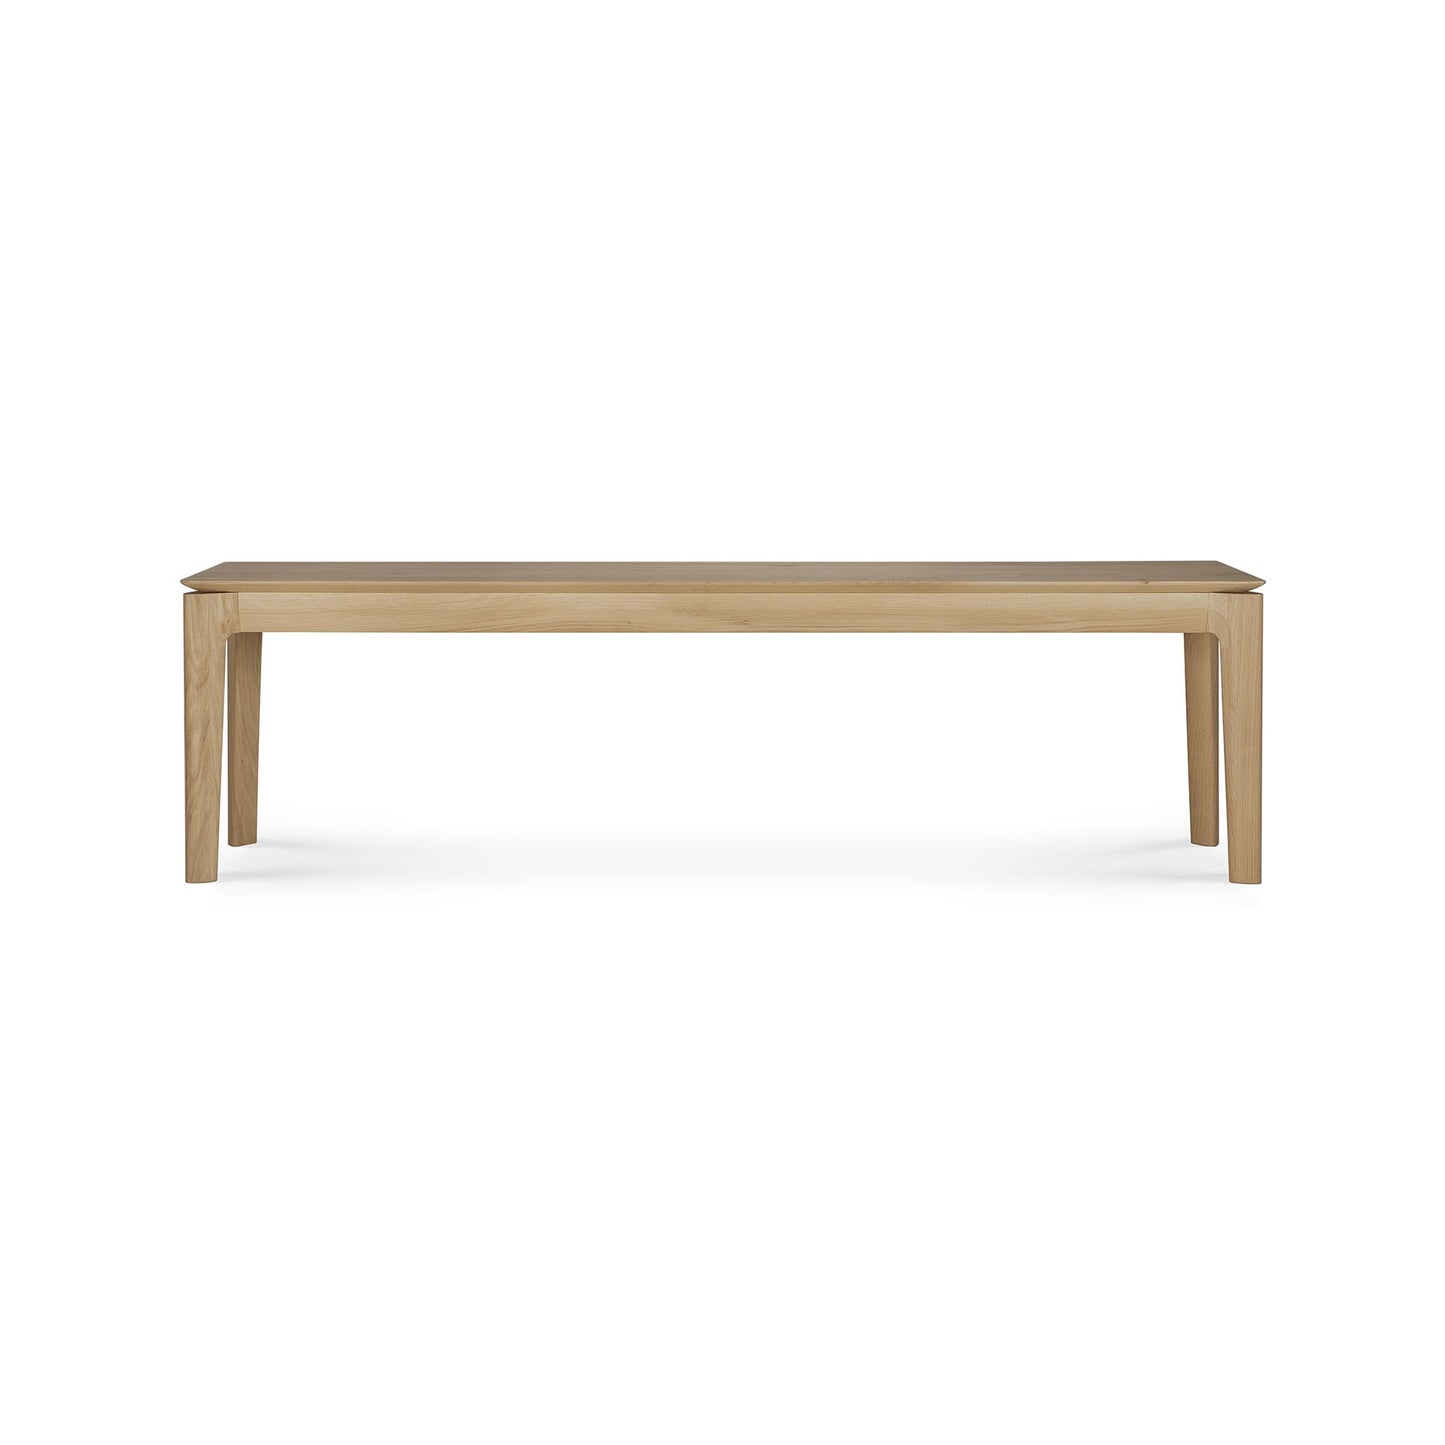 Ethnicraft Oak Bok Bench Seat is available from Make Your House A Home, Bendigo, Victoria, Australia